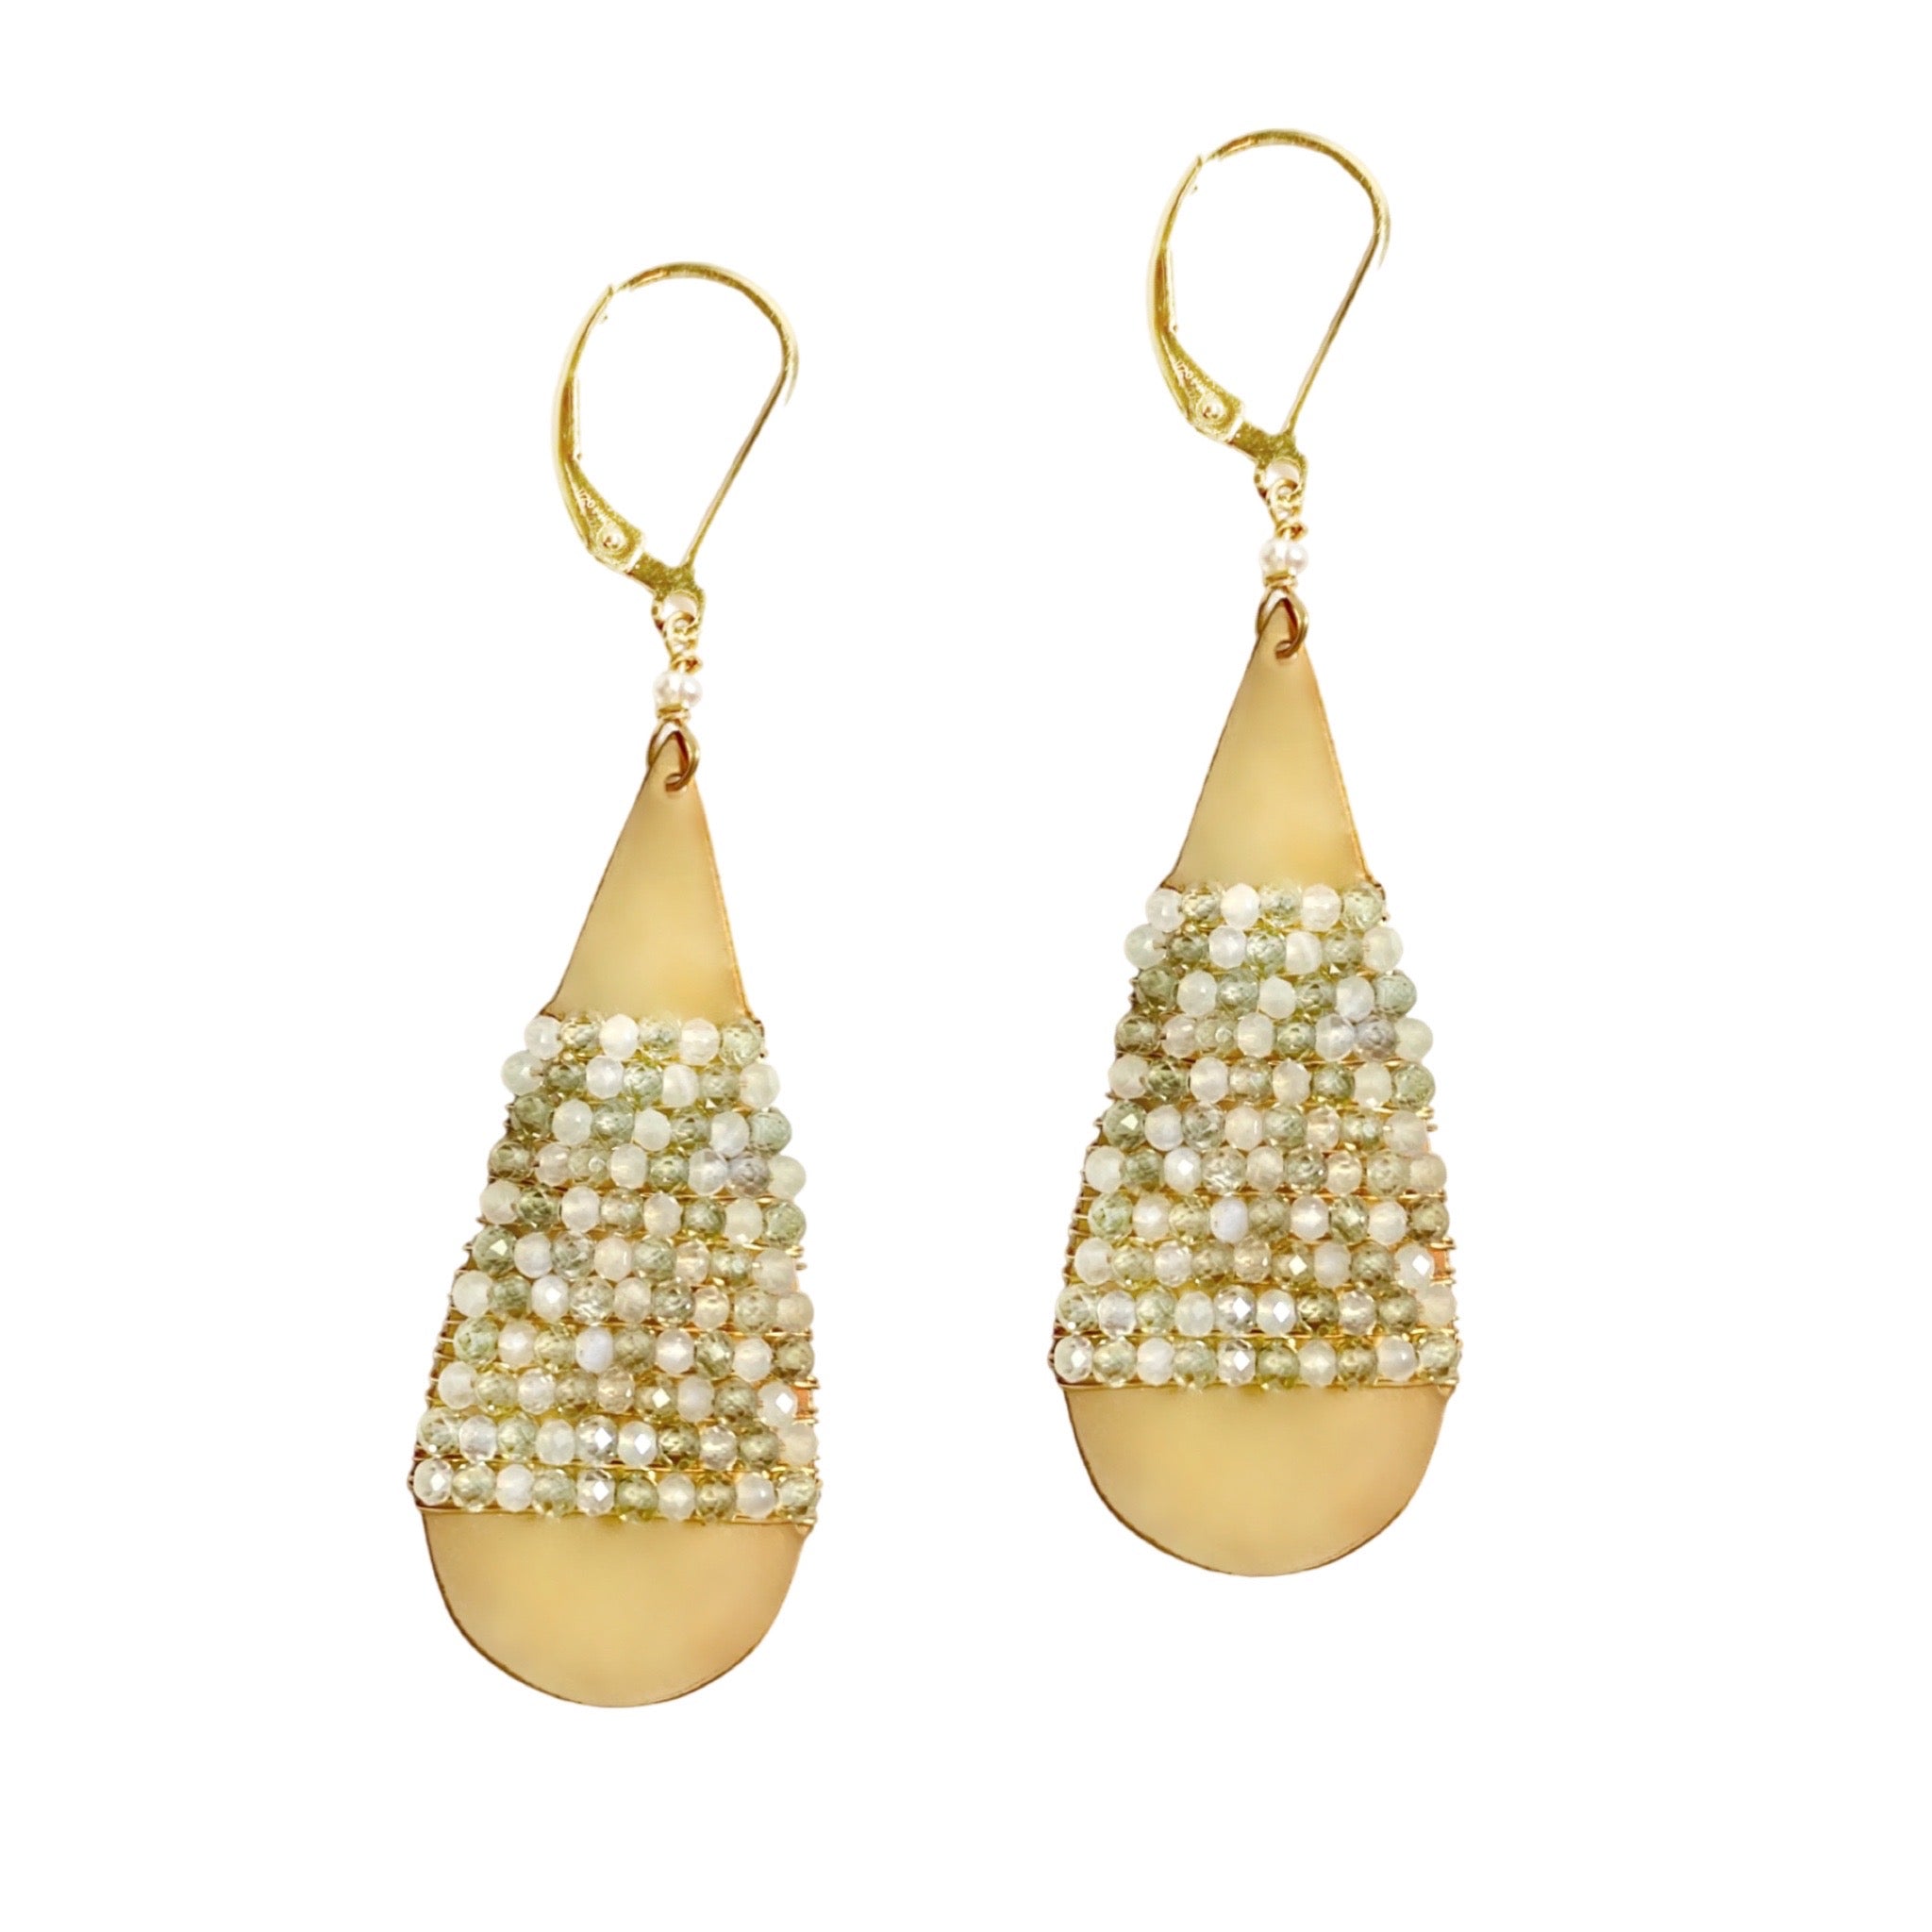 These Michelle Pressler gold buffed teardrop statement earrings are wired with moonstone and natural zircon to give them a bit of everyday sparkle. Available at Shaylula Jewlery & Gifts in Tarrytown, NY and online.